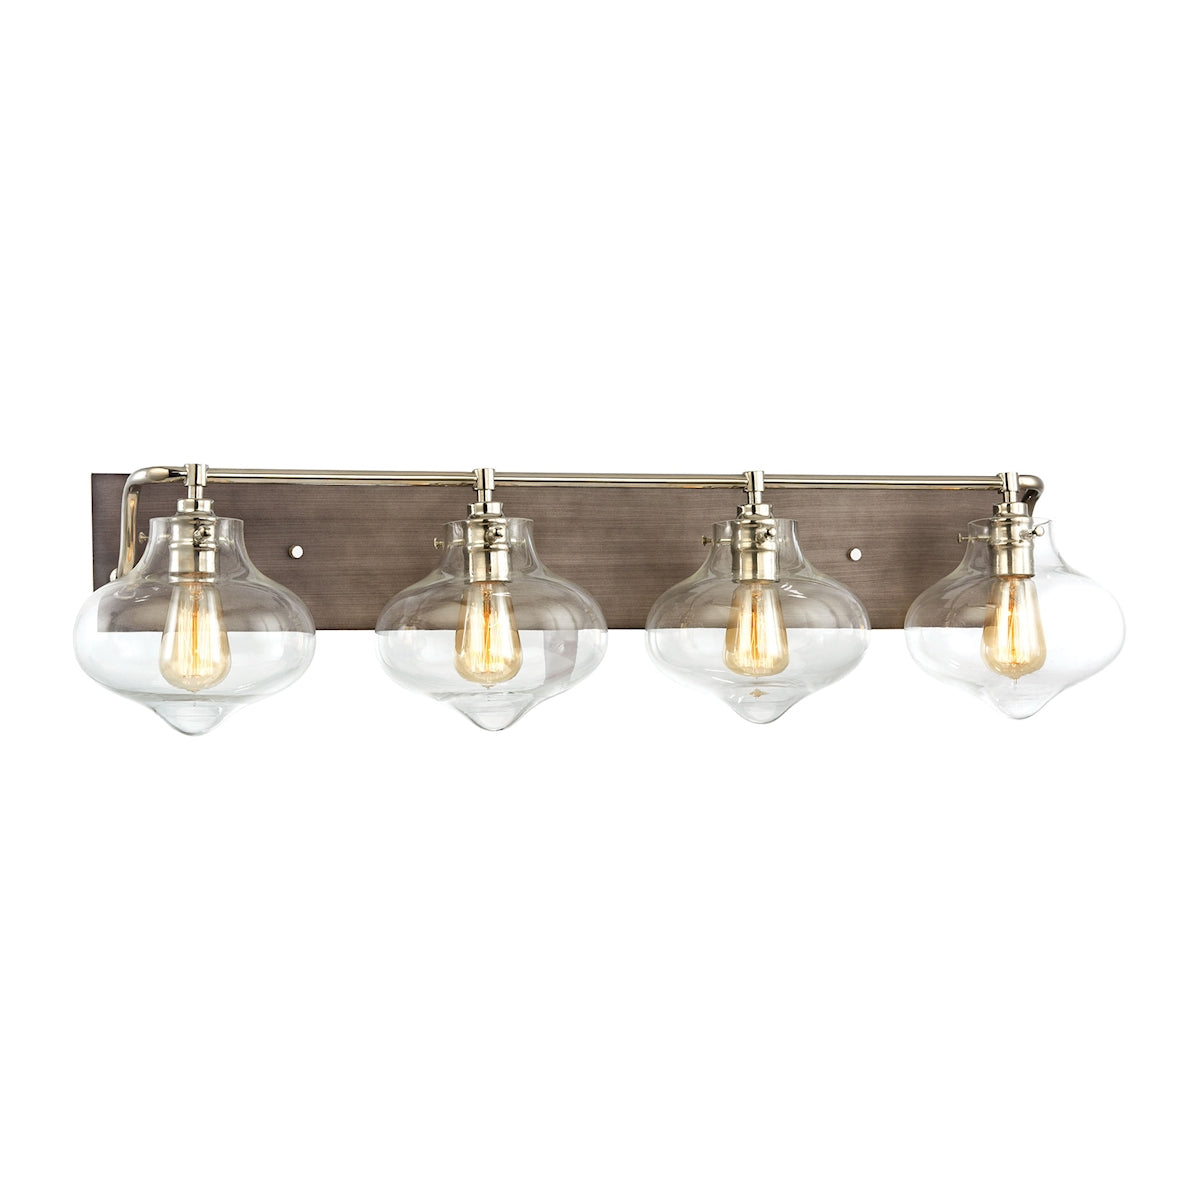 ELK Lighting 31943/4 Kelsey 4-Light Vanity Sconce in Polished Nickel and Weathered Zinc with Clear Glass